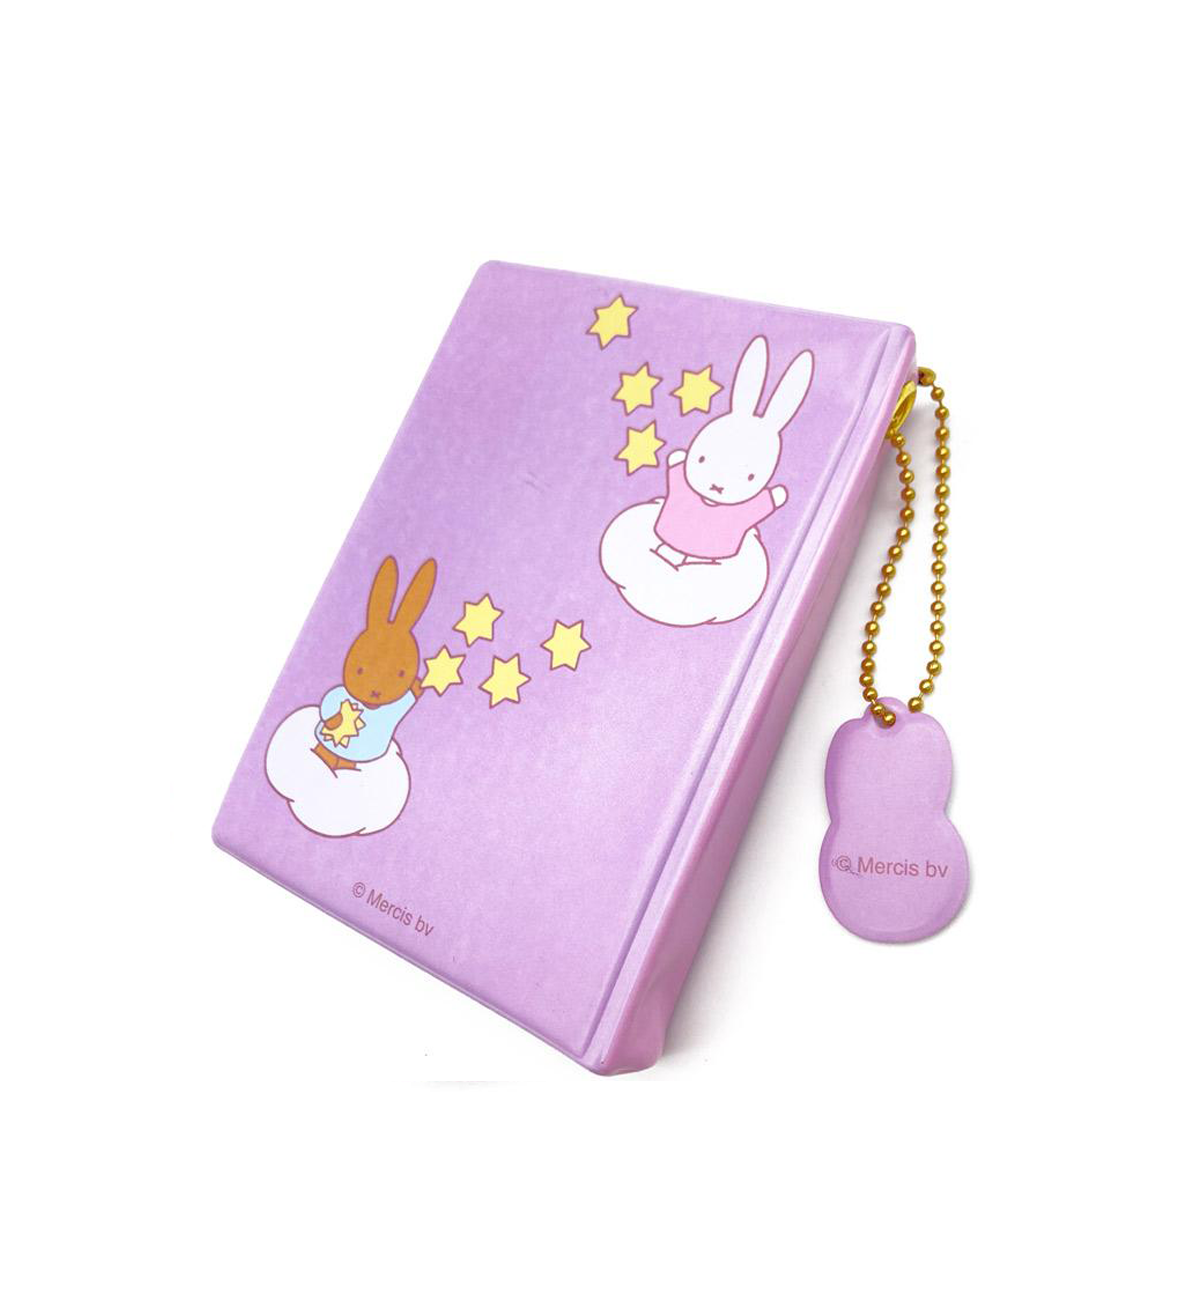 Miffy Photocard Collect Book [Purple]